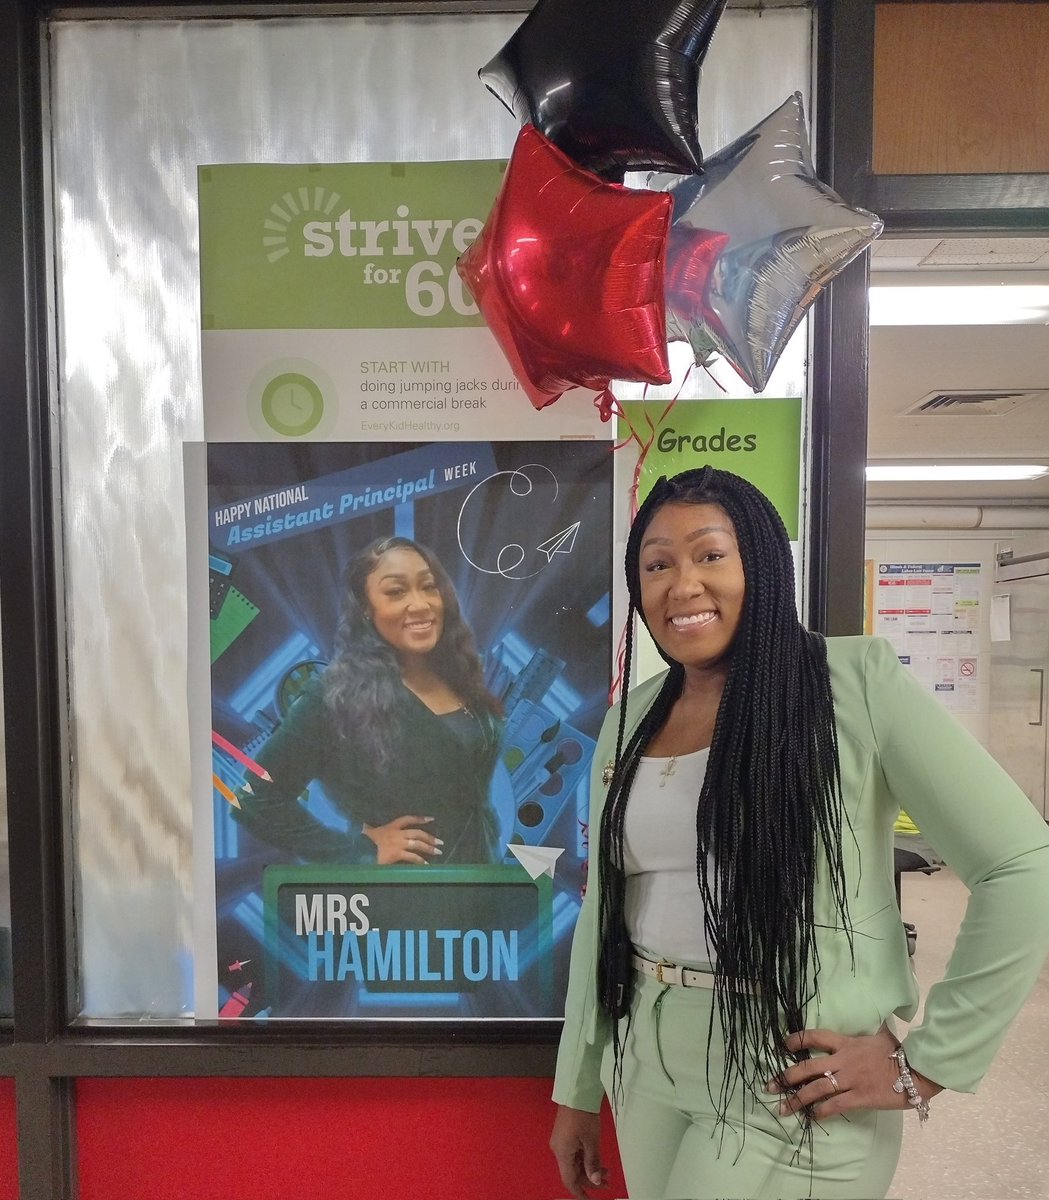 Mrs. Hamilton is the best in @ChiPubSchools !! 

#apweek23 #thebestarewithcps #BlackGirlMagic #educator #RepresentationMatters